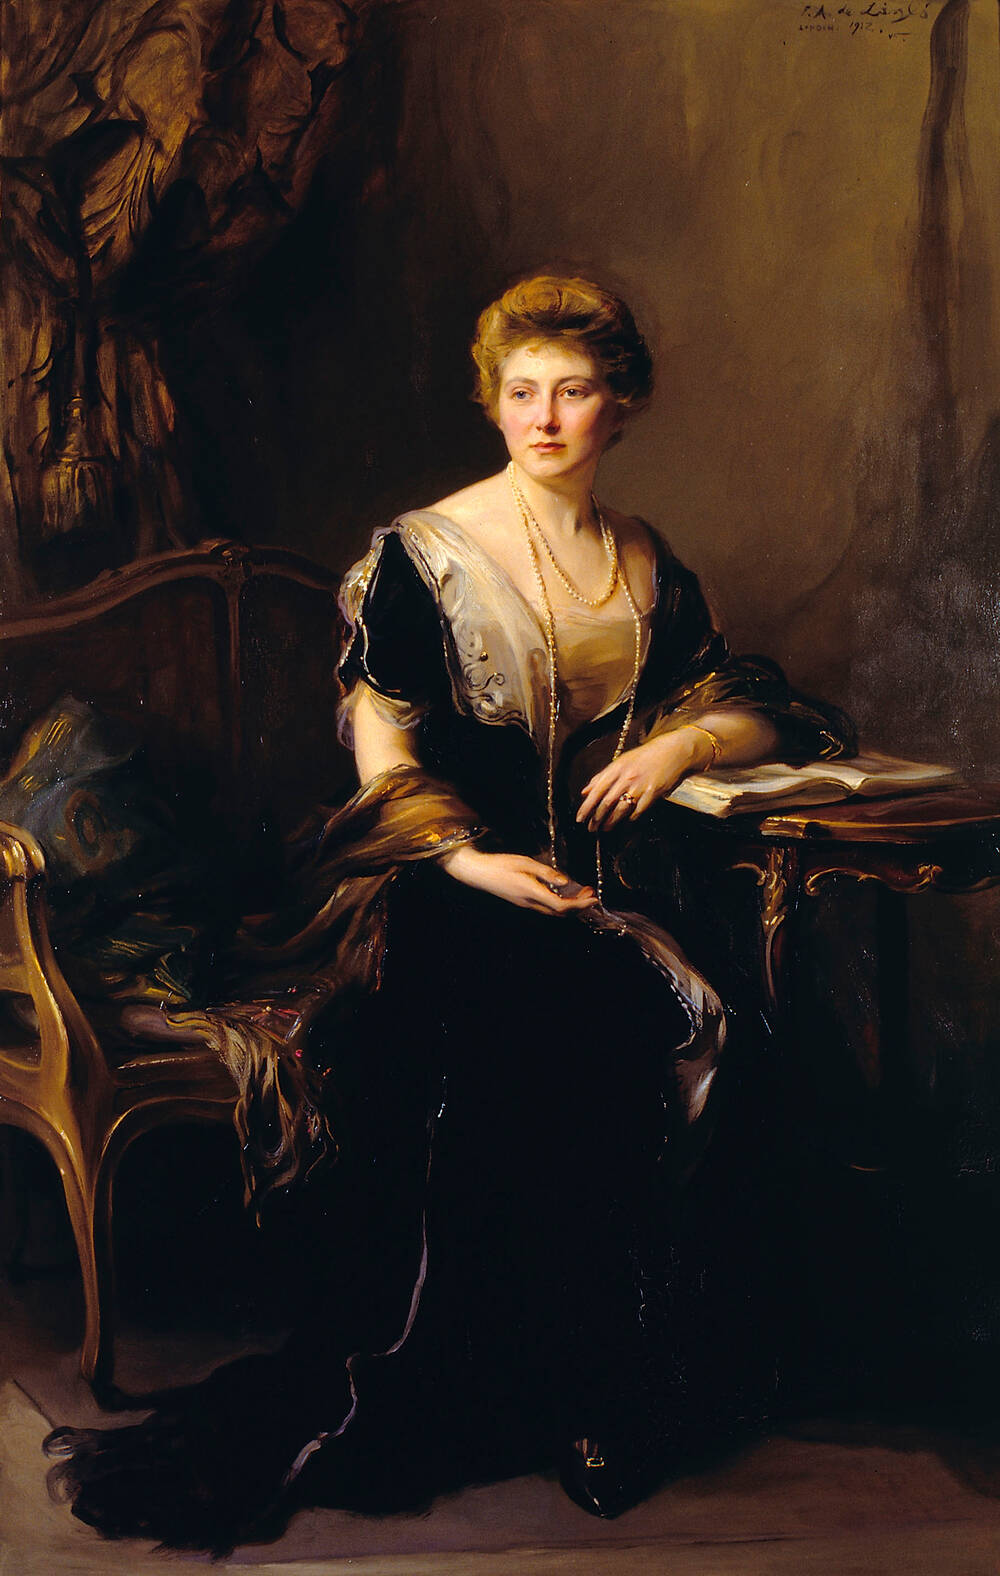 'Mary, Duchess of Montrose' by Philip A. De Lazlo in 1912.